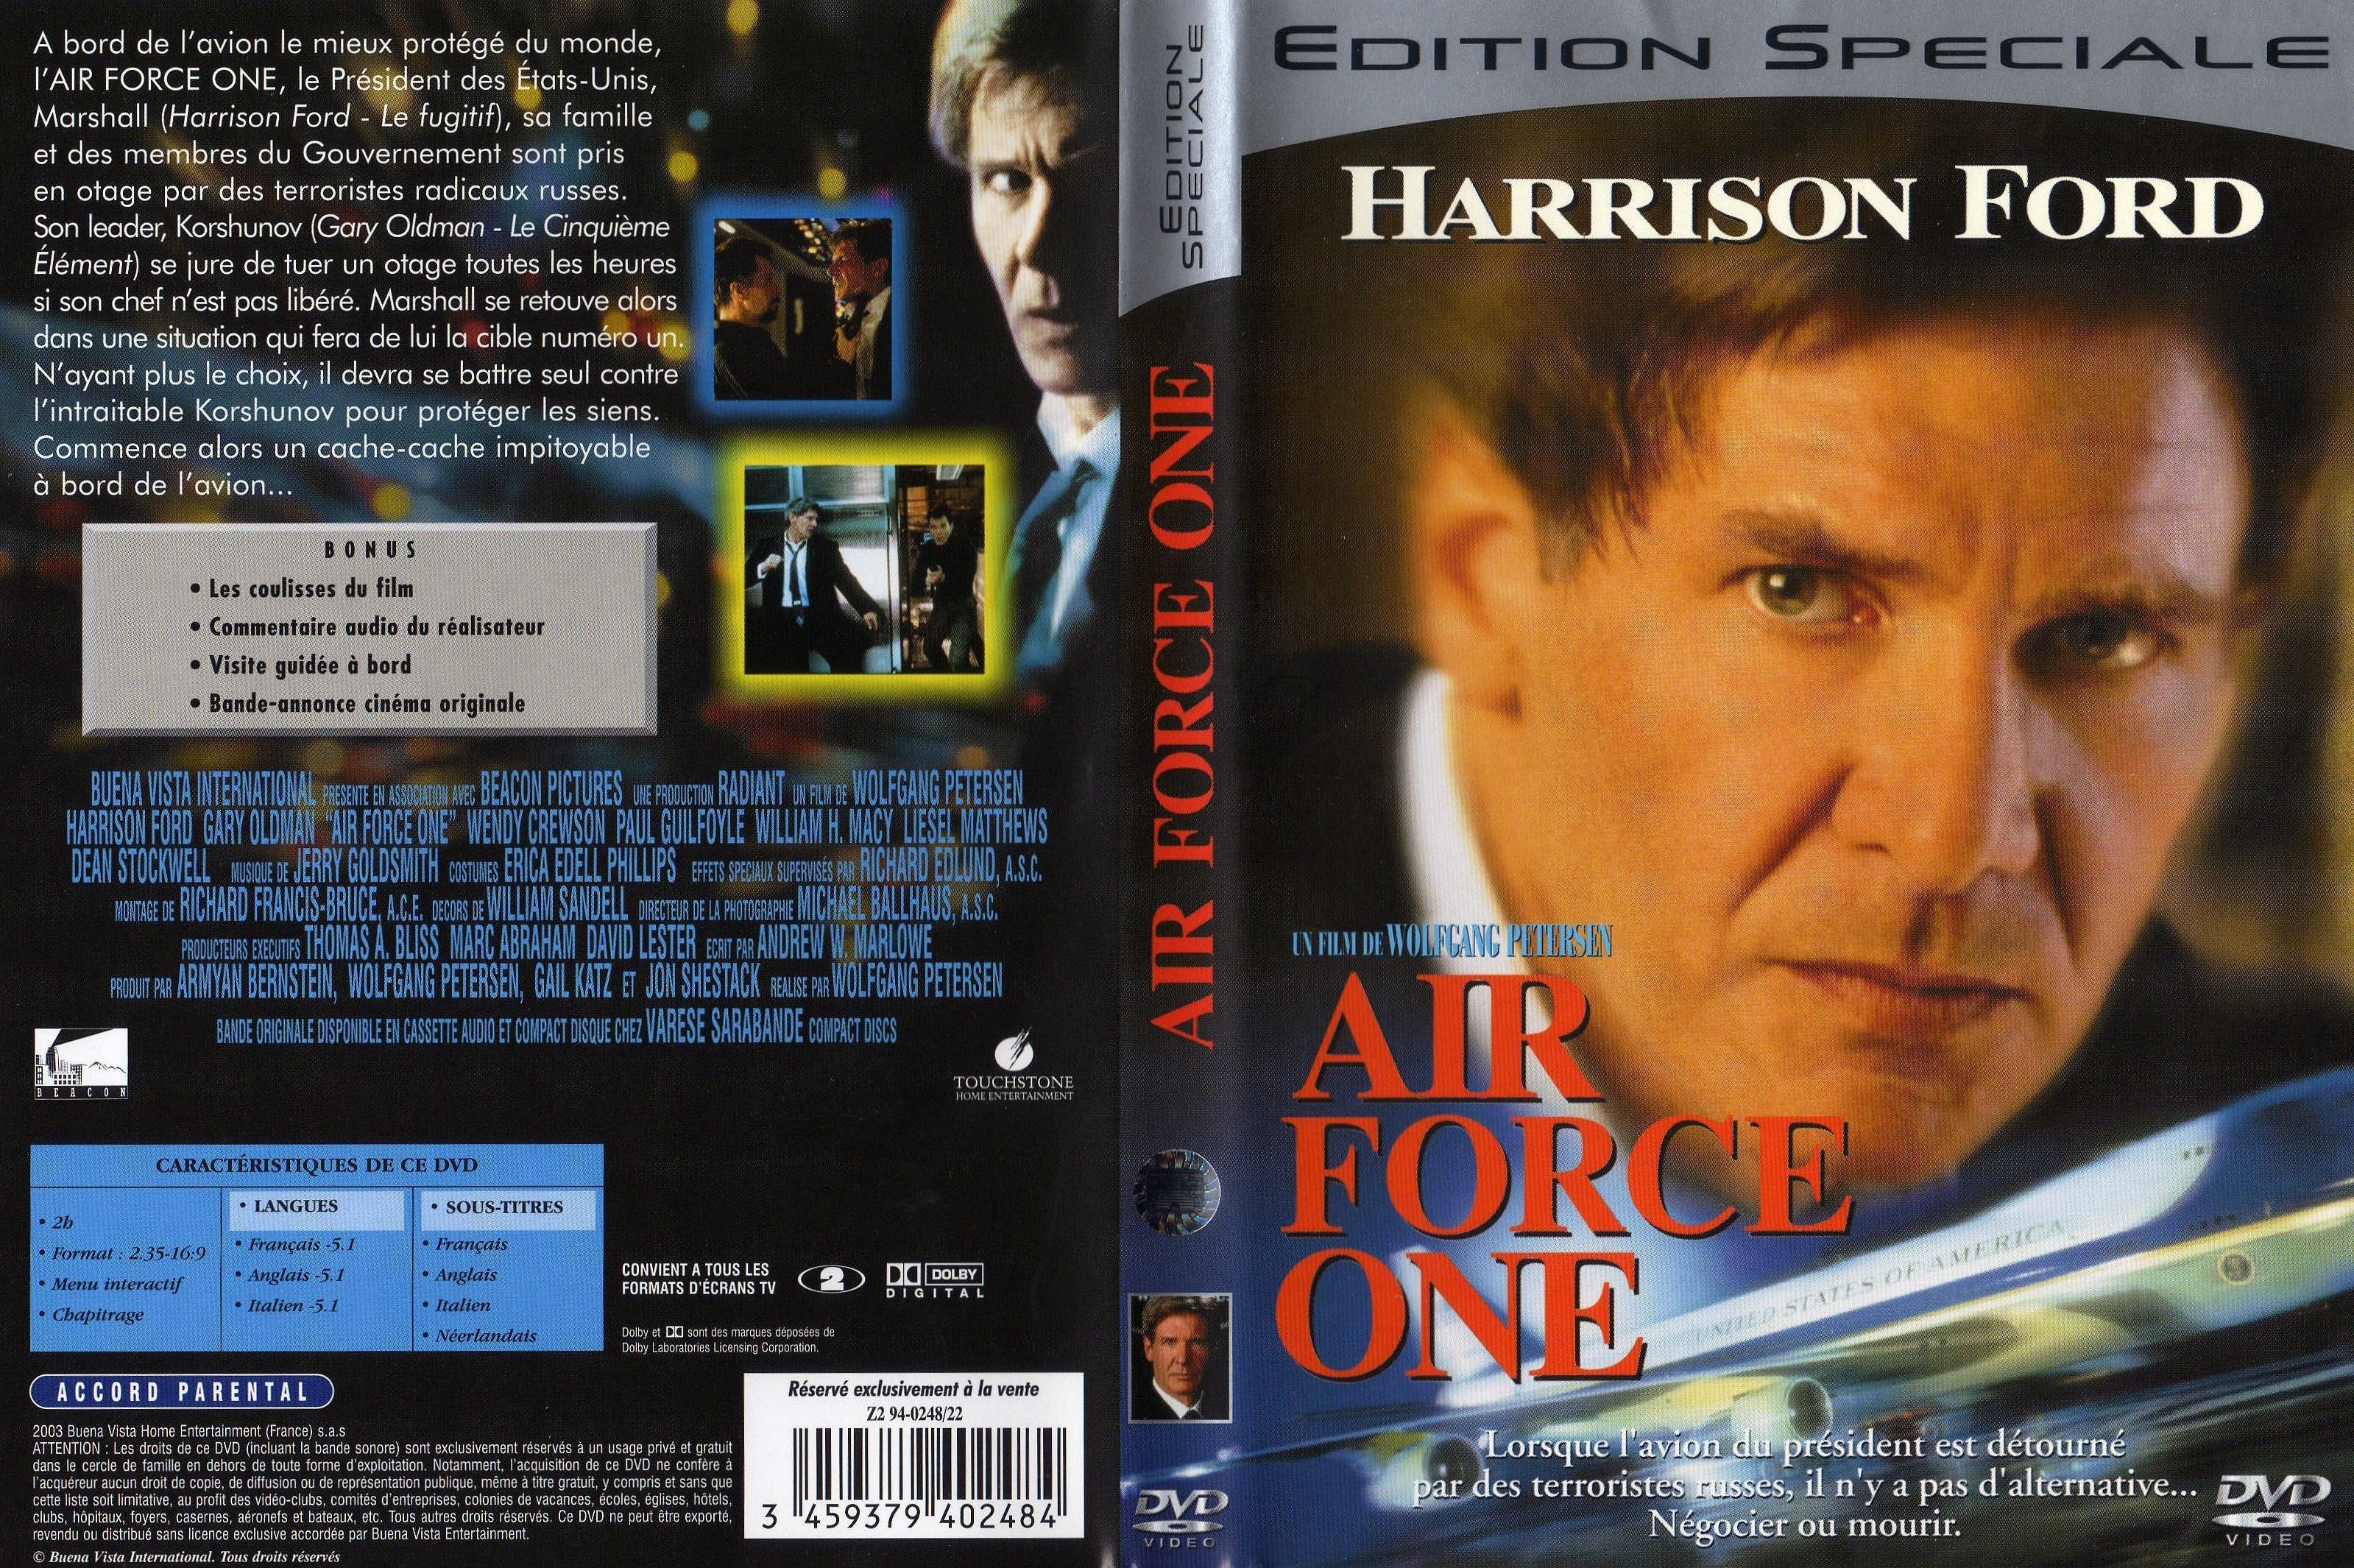 Jaquette DVD Air force one